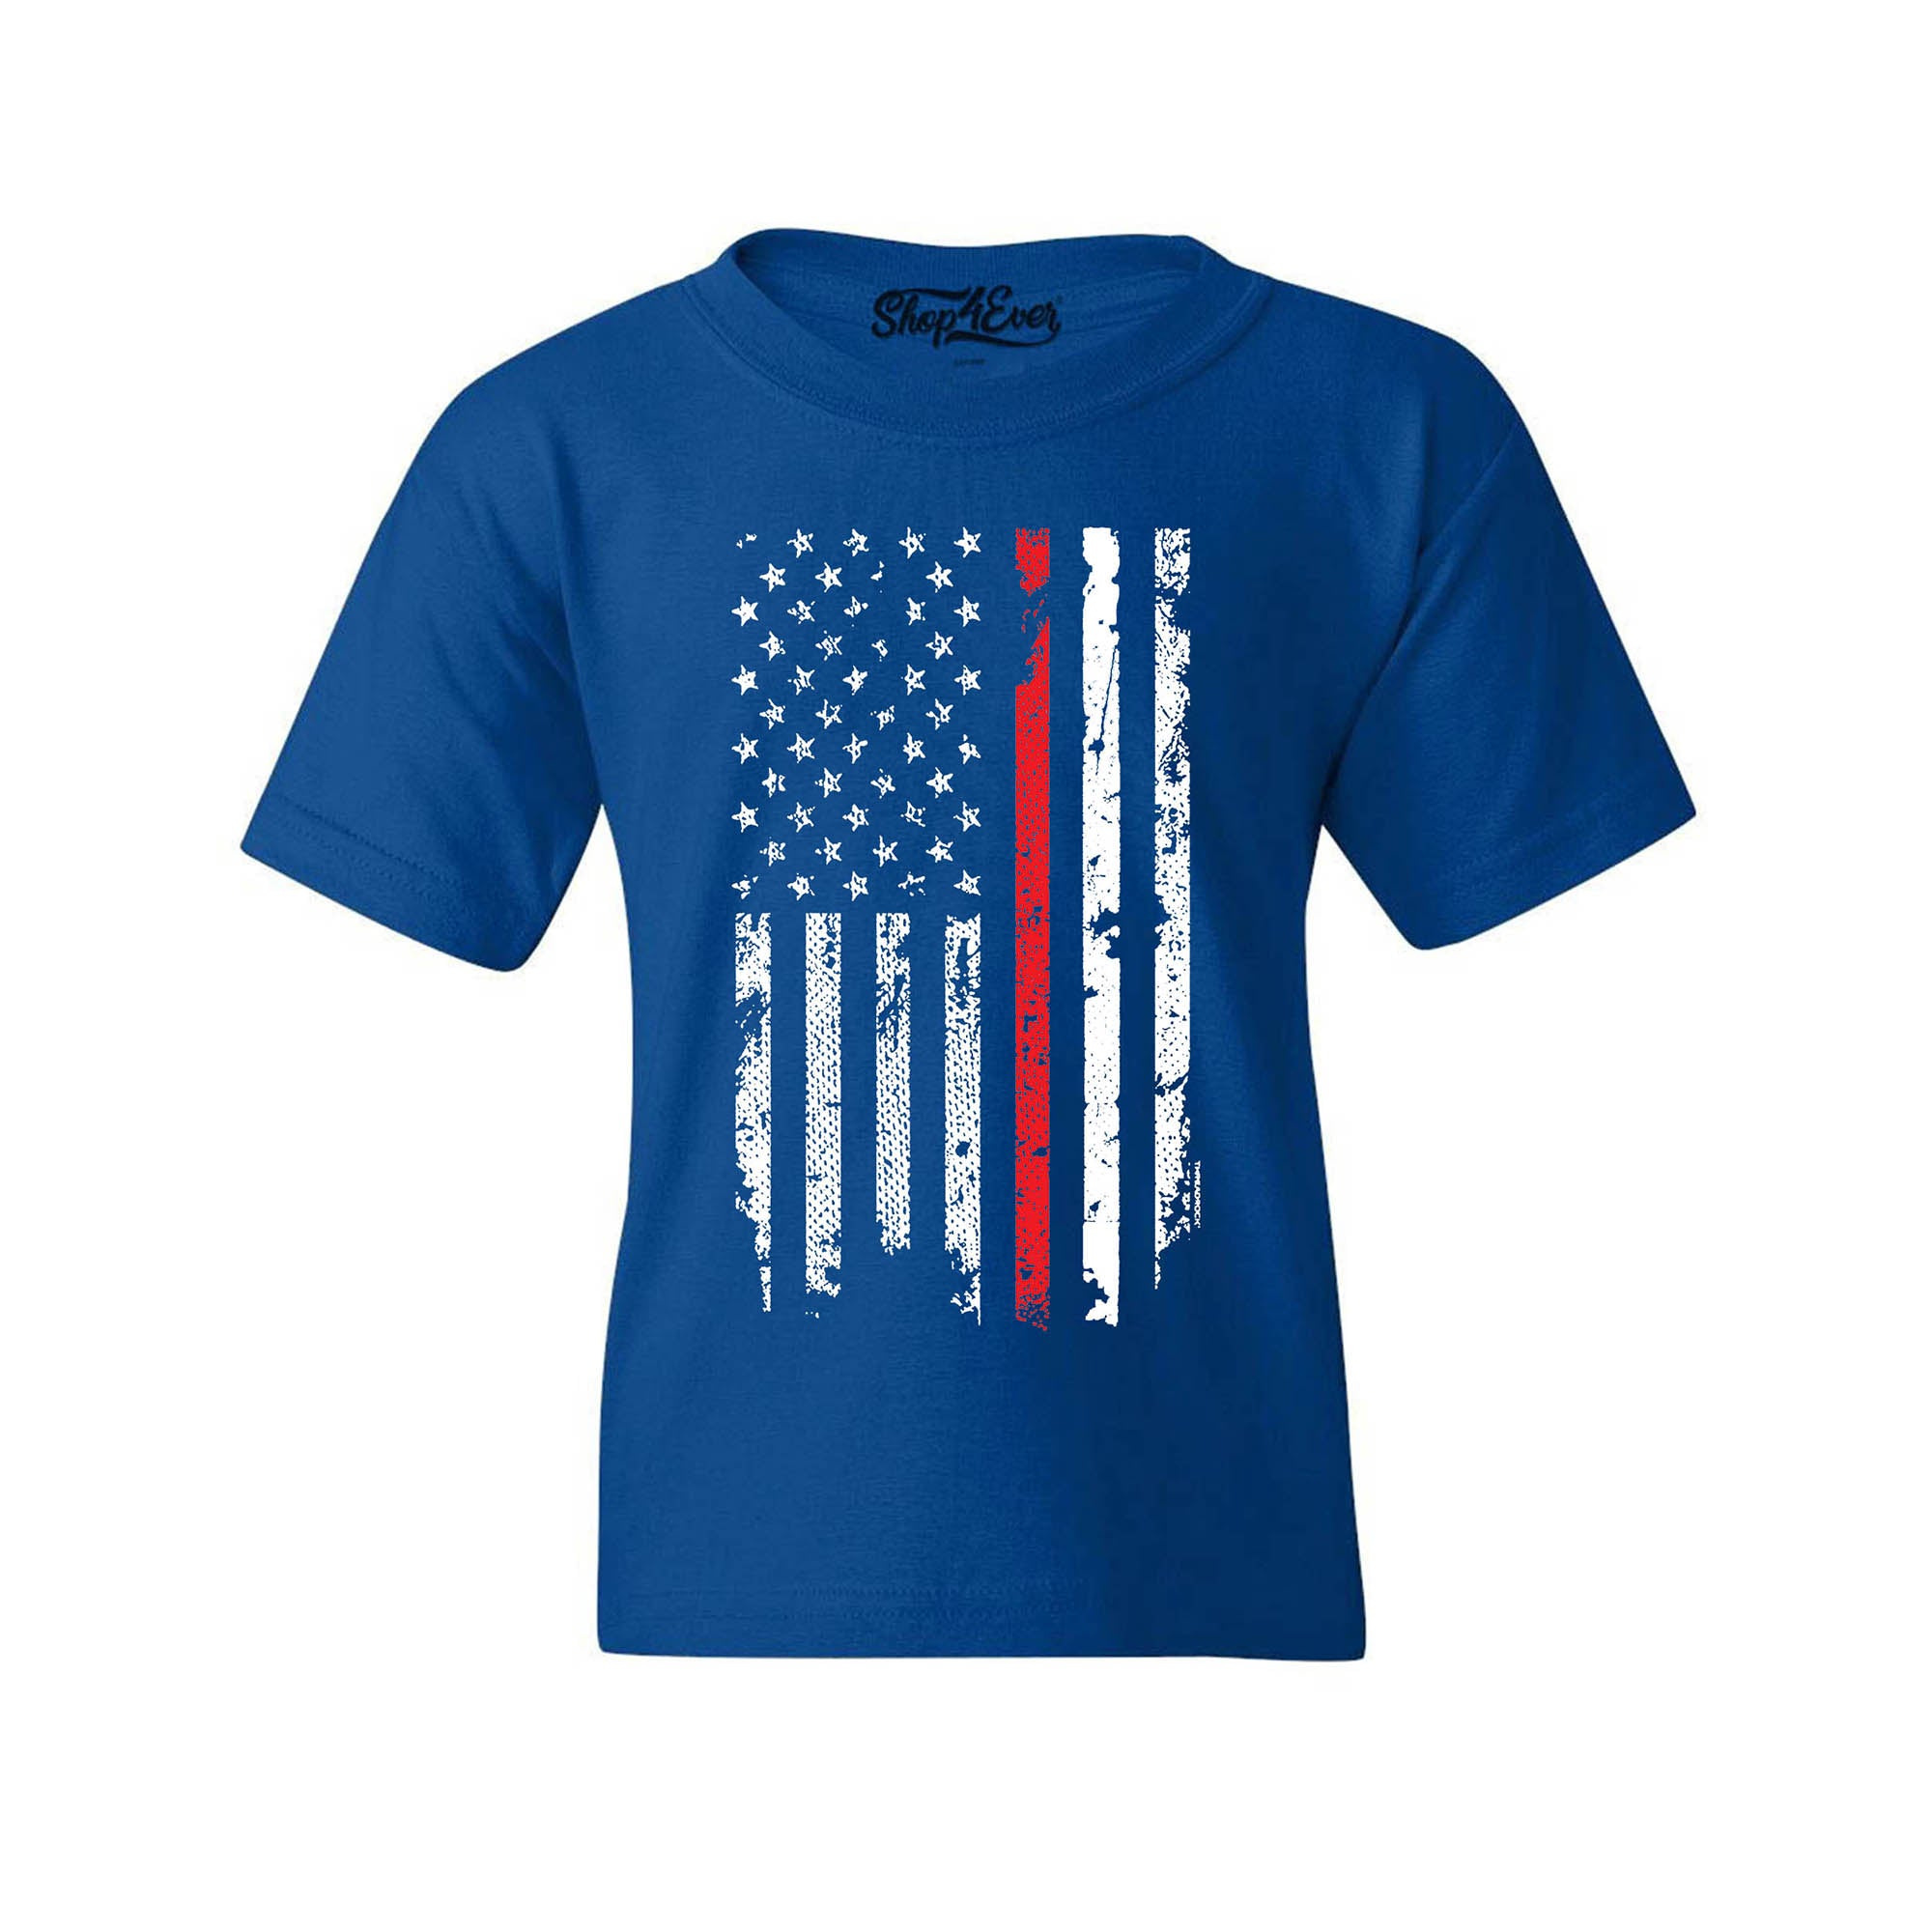 Firefighter American Flag Red Line Stripe USA Youth's T-Shirt 4th of July Shirts